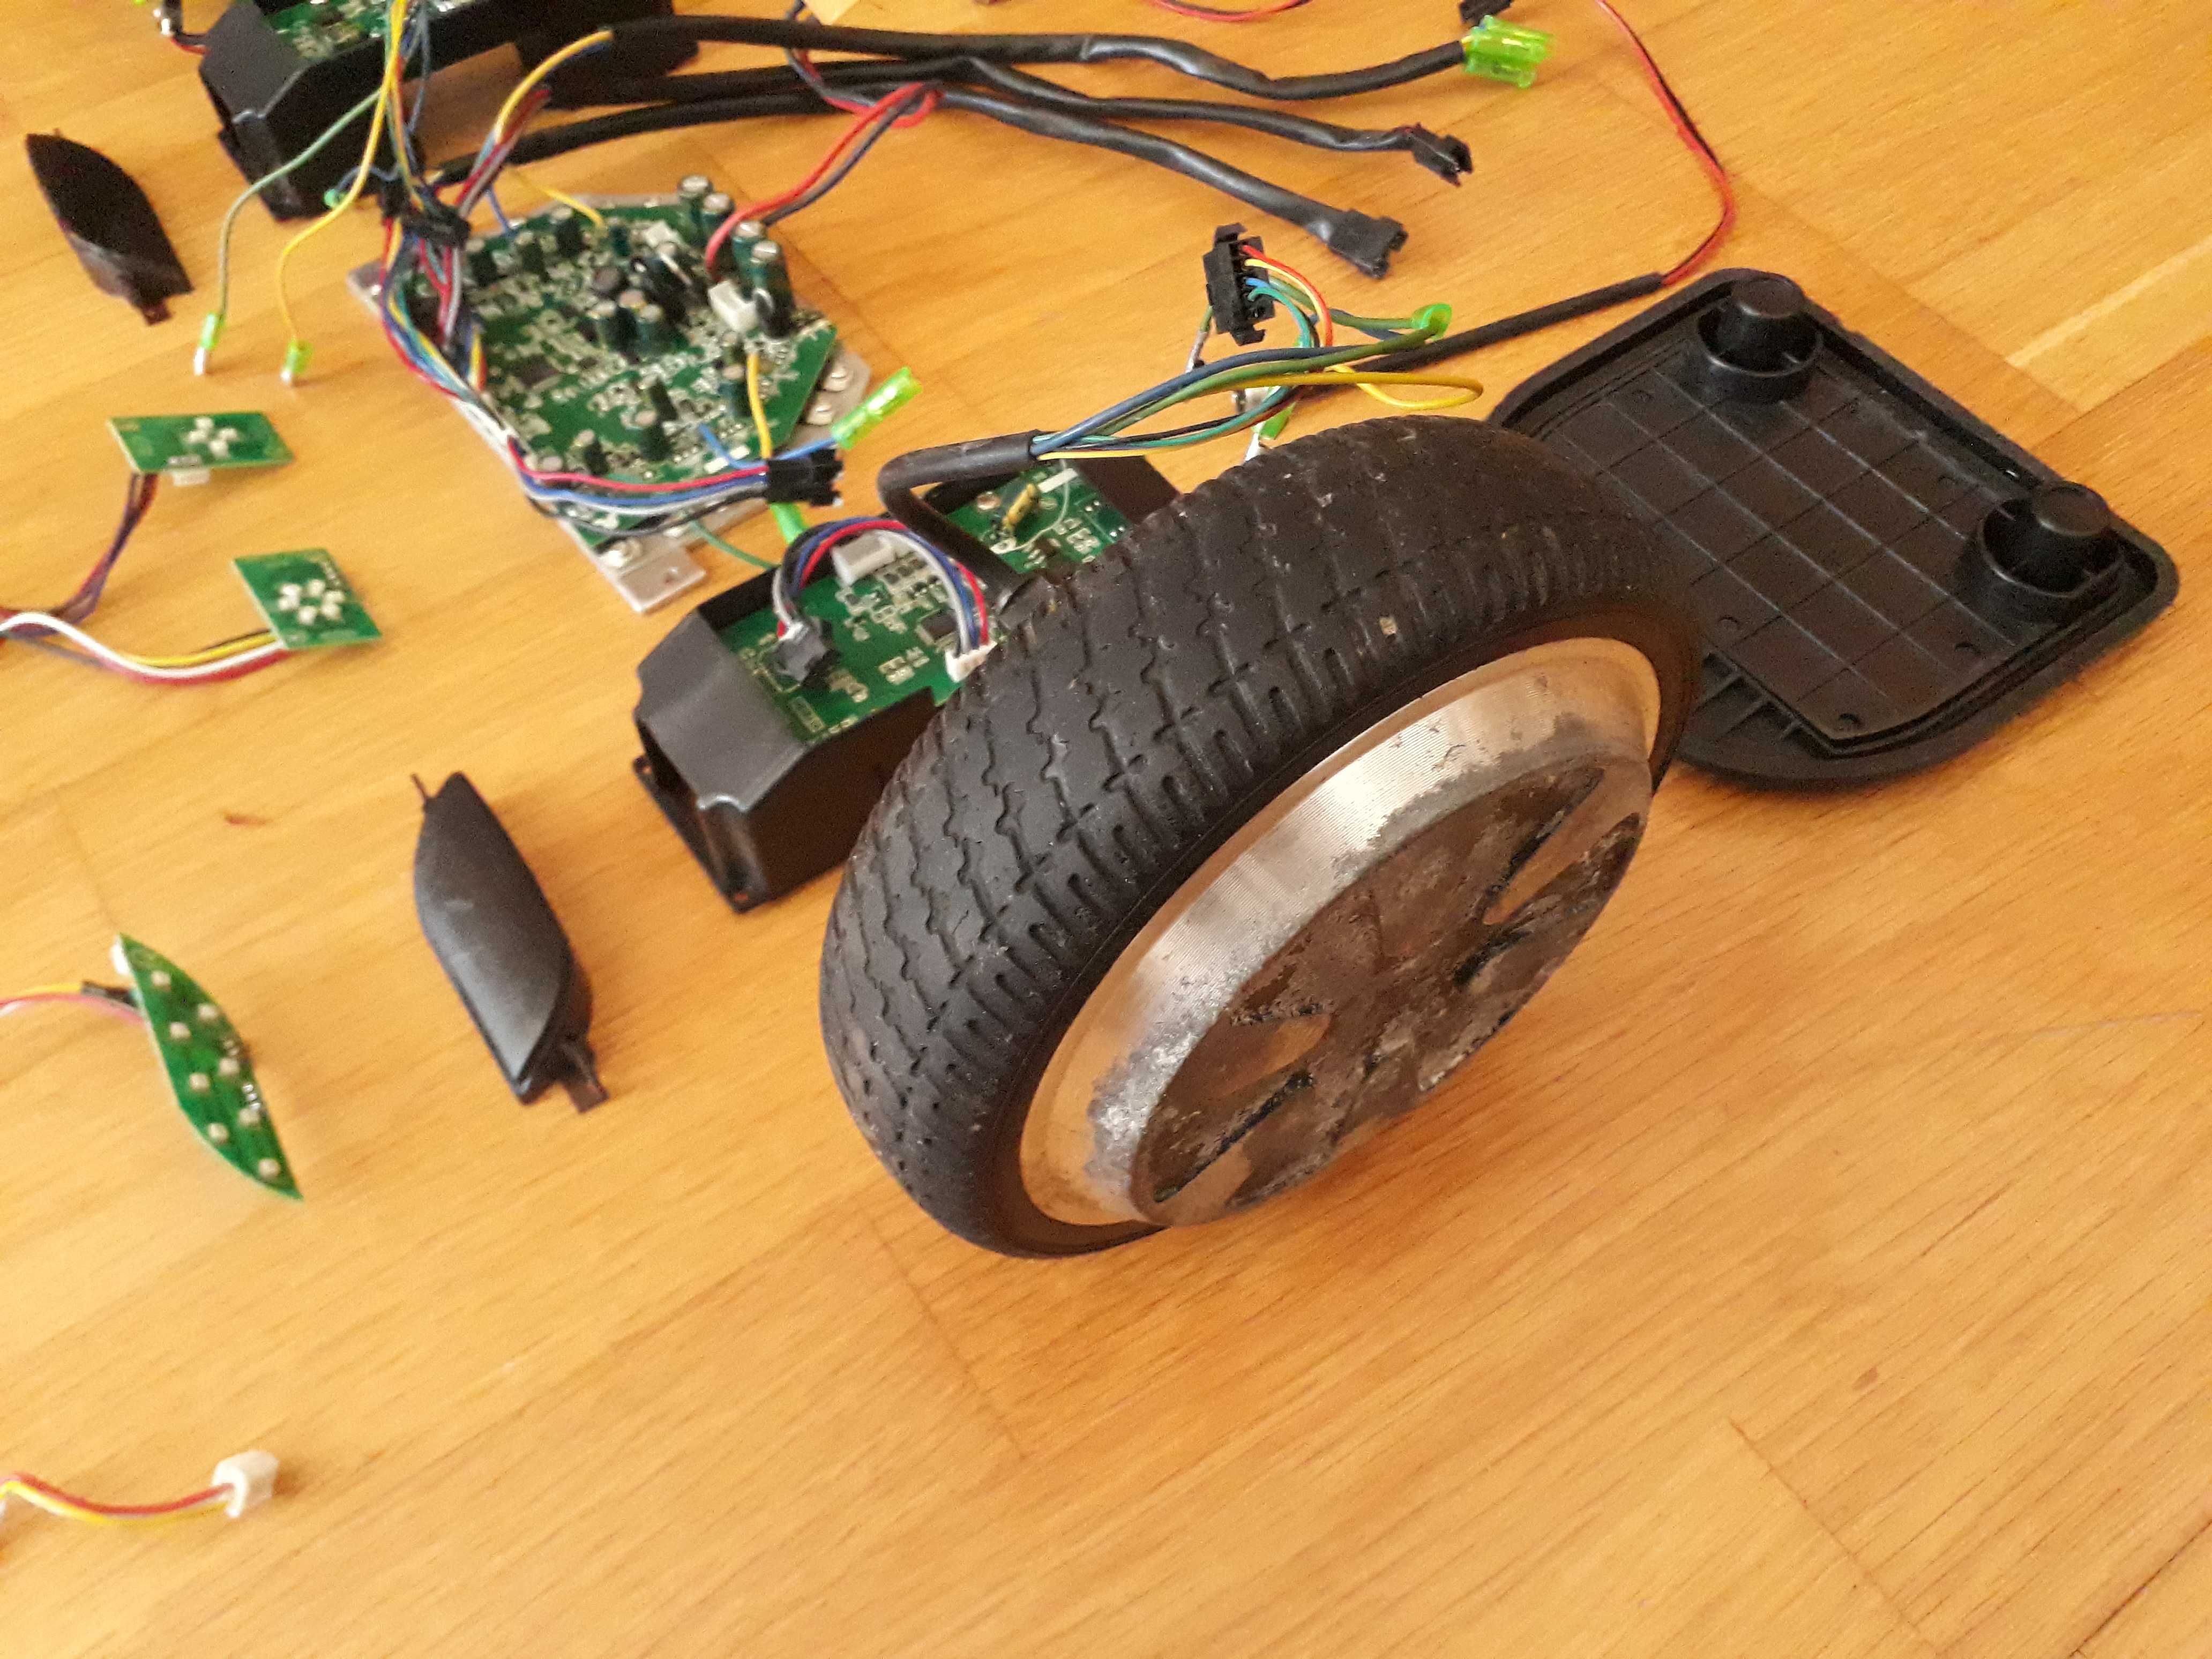 Hardware do mesmo Hoverboard